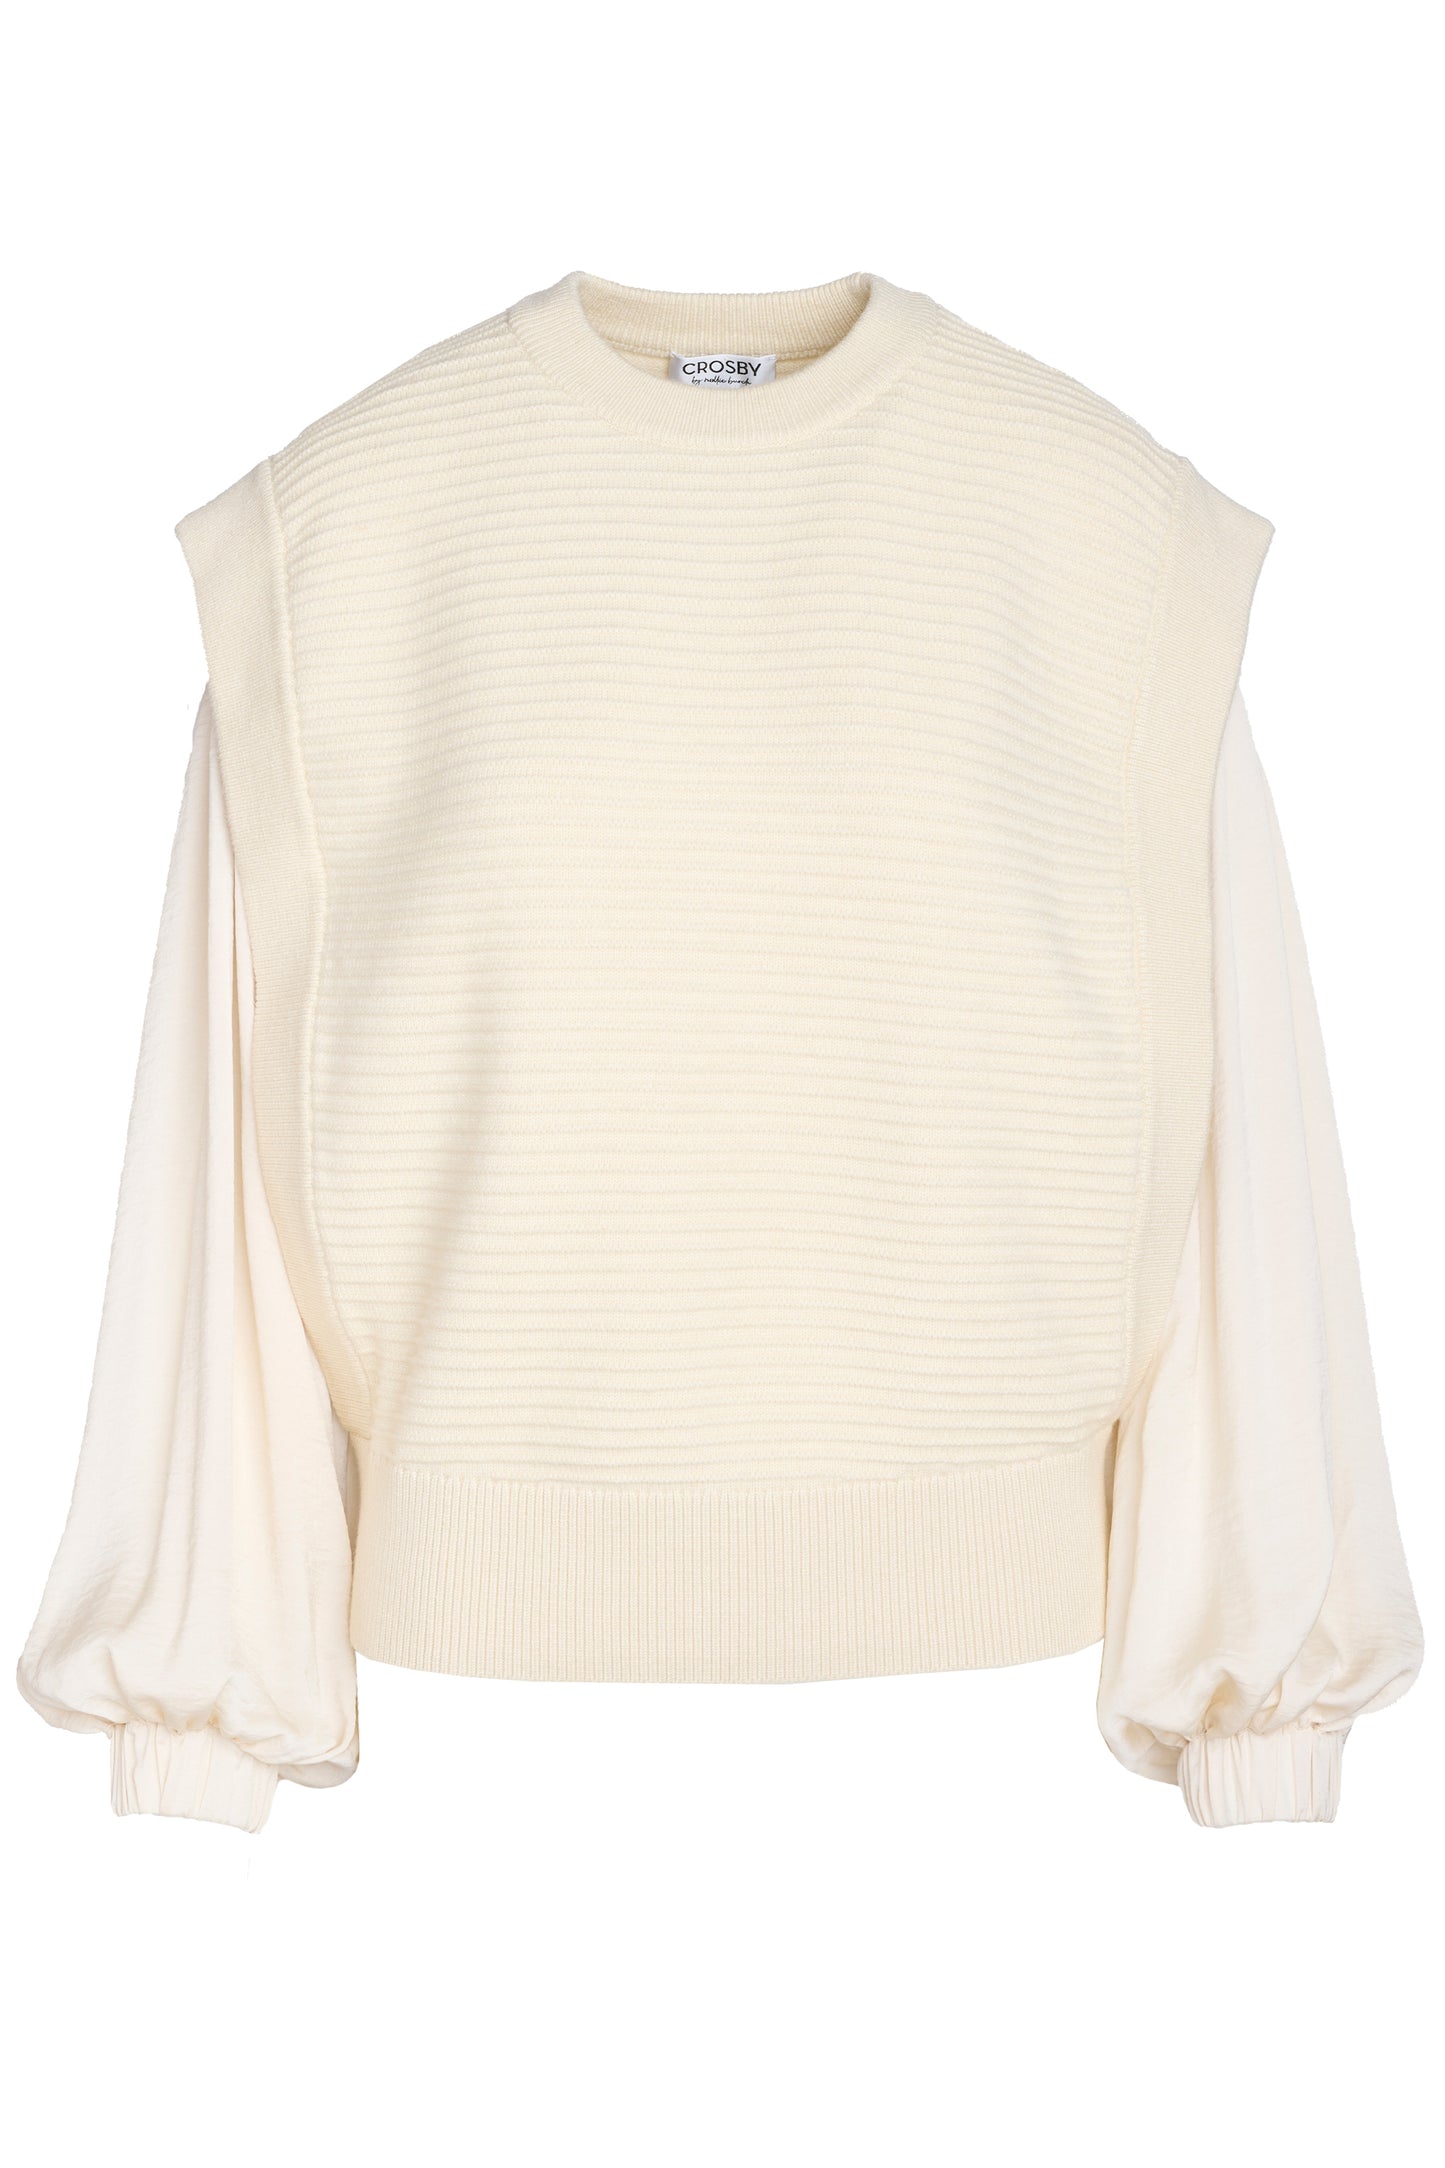 Barkley Top in Ivory | CROSBY by Mollie Burch